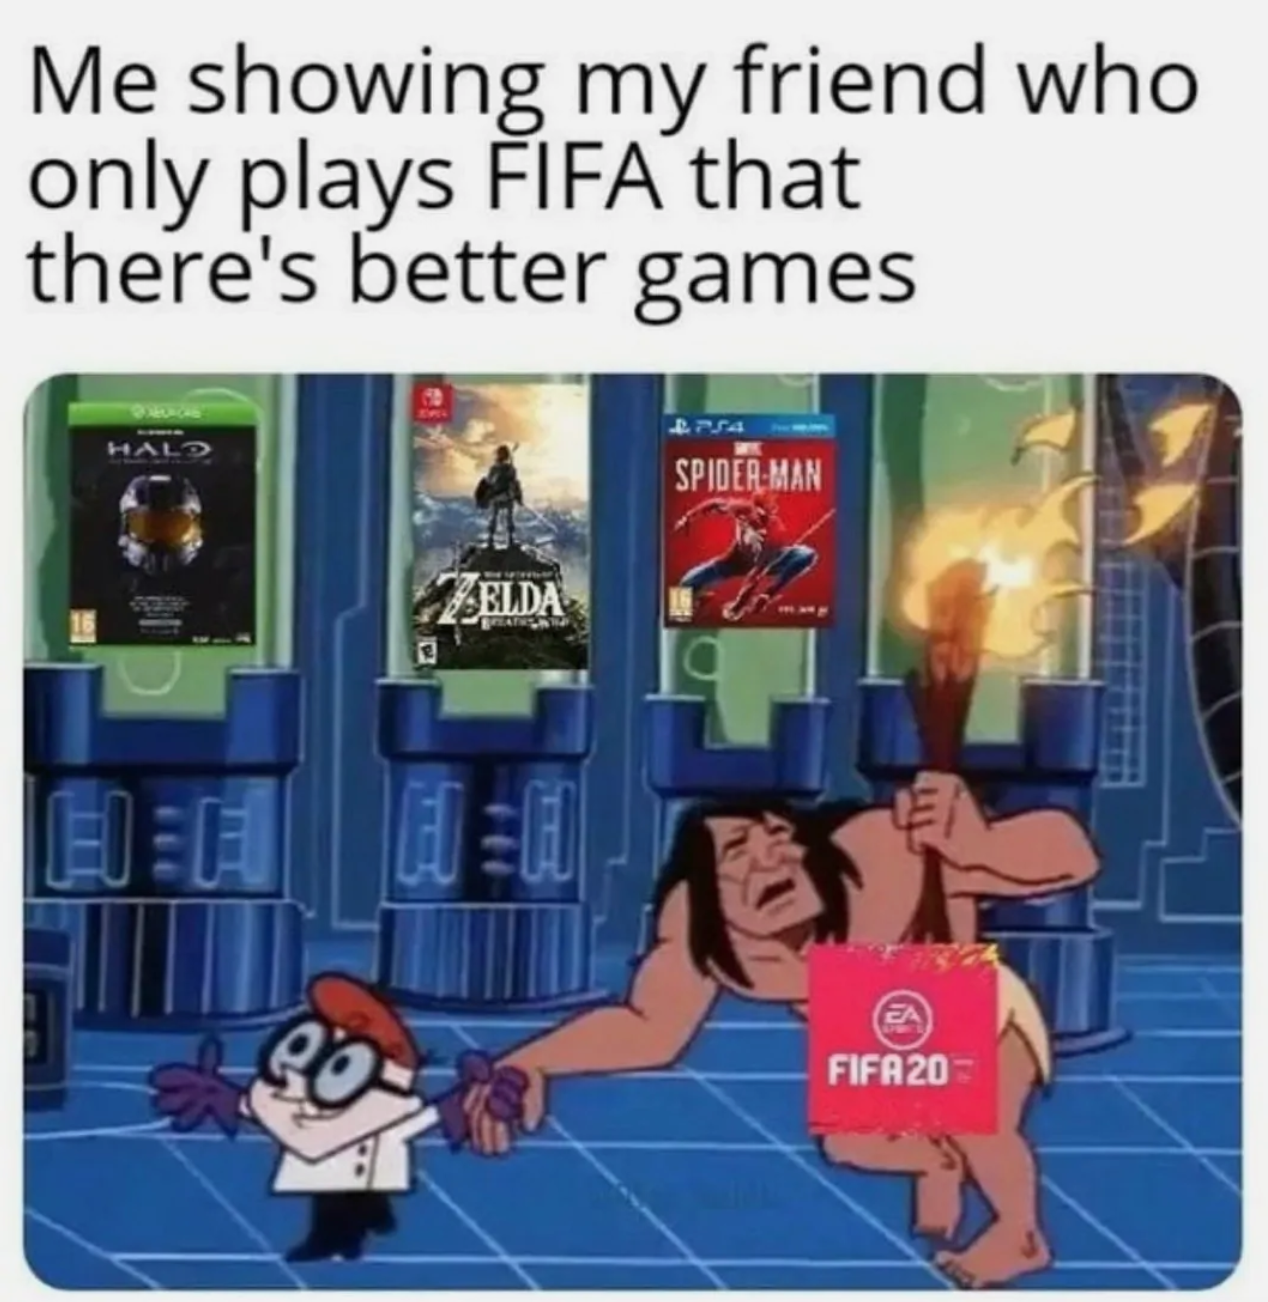 primal spear - Me showing my friend who only plays Fifa that there's better games Hald SpiderMan Zelda Ejet FIFA20